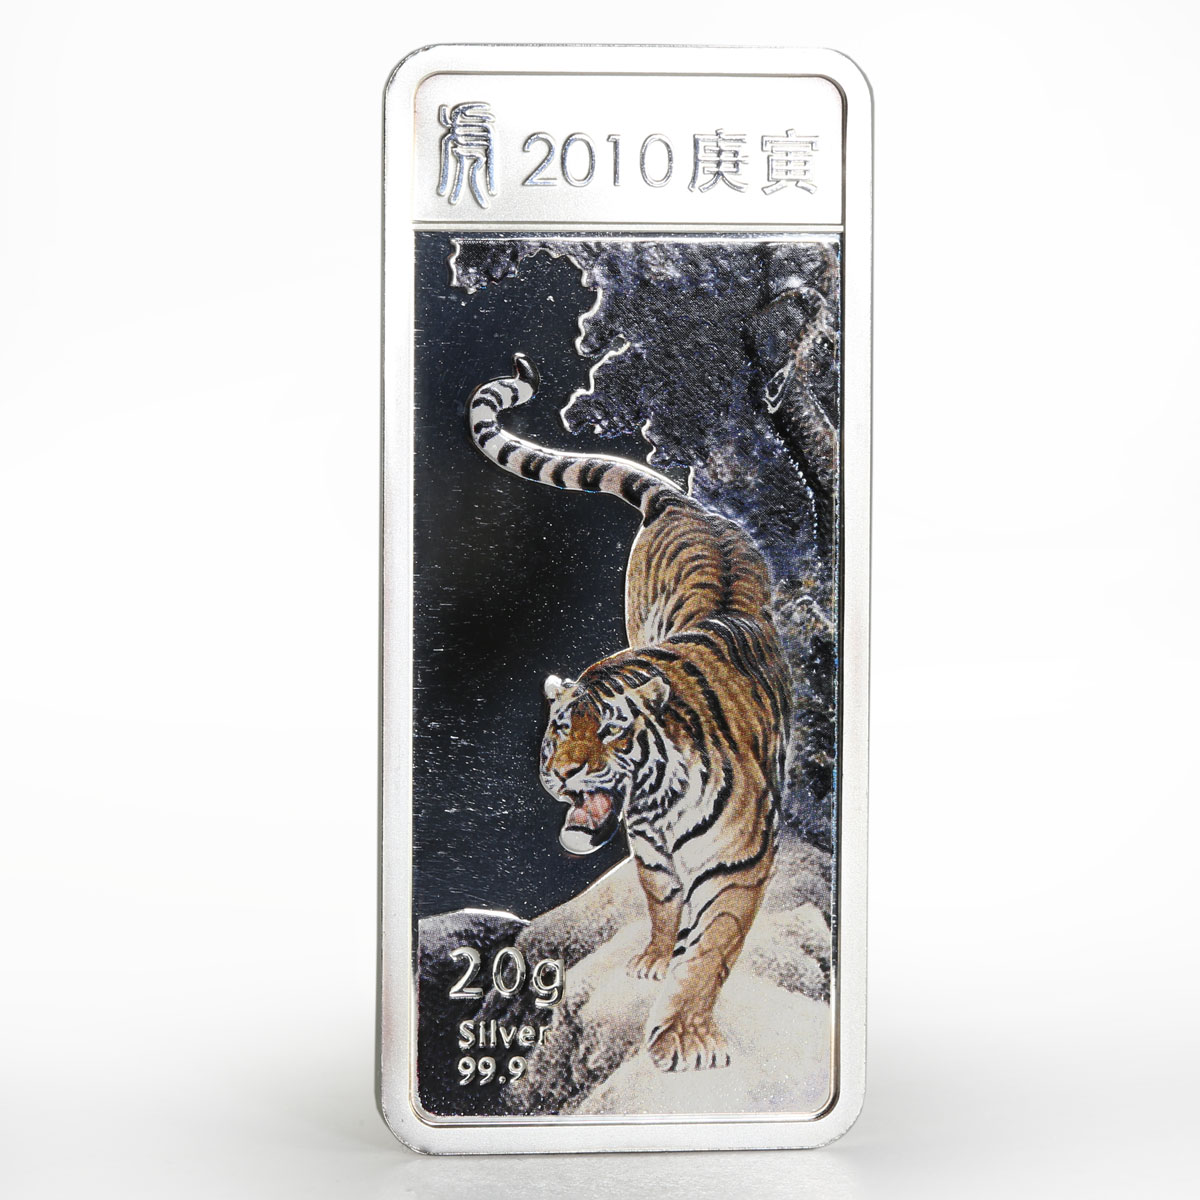 Liberia 5 dollars Year of the Tiger colored proof silver coin 2010